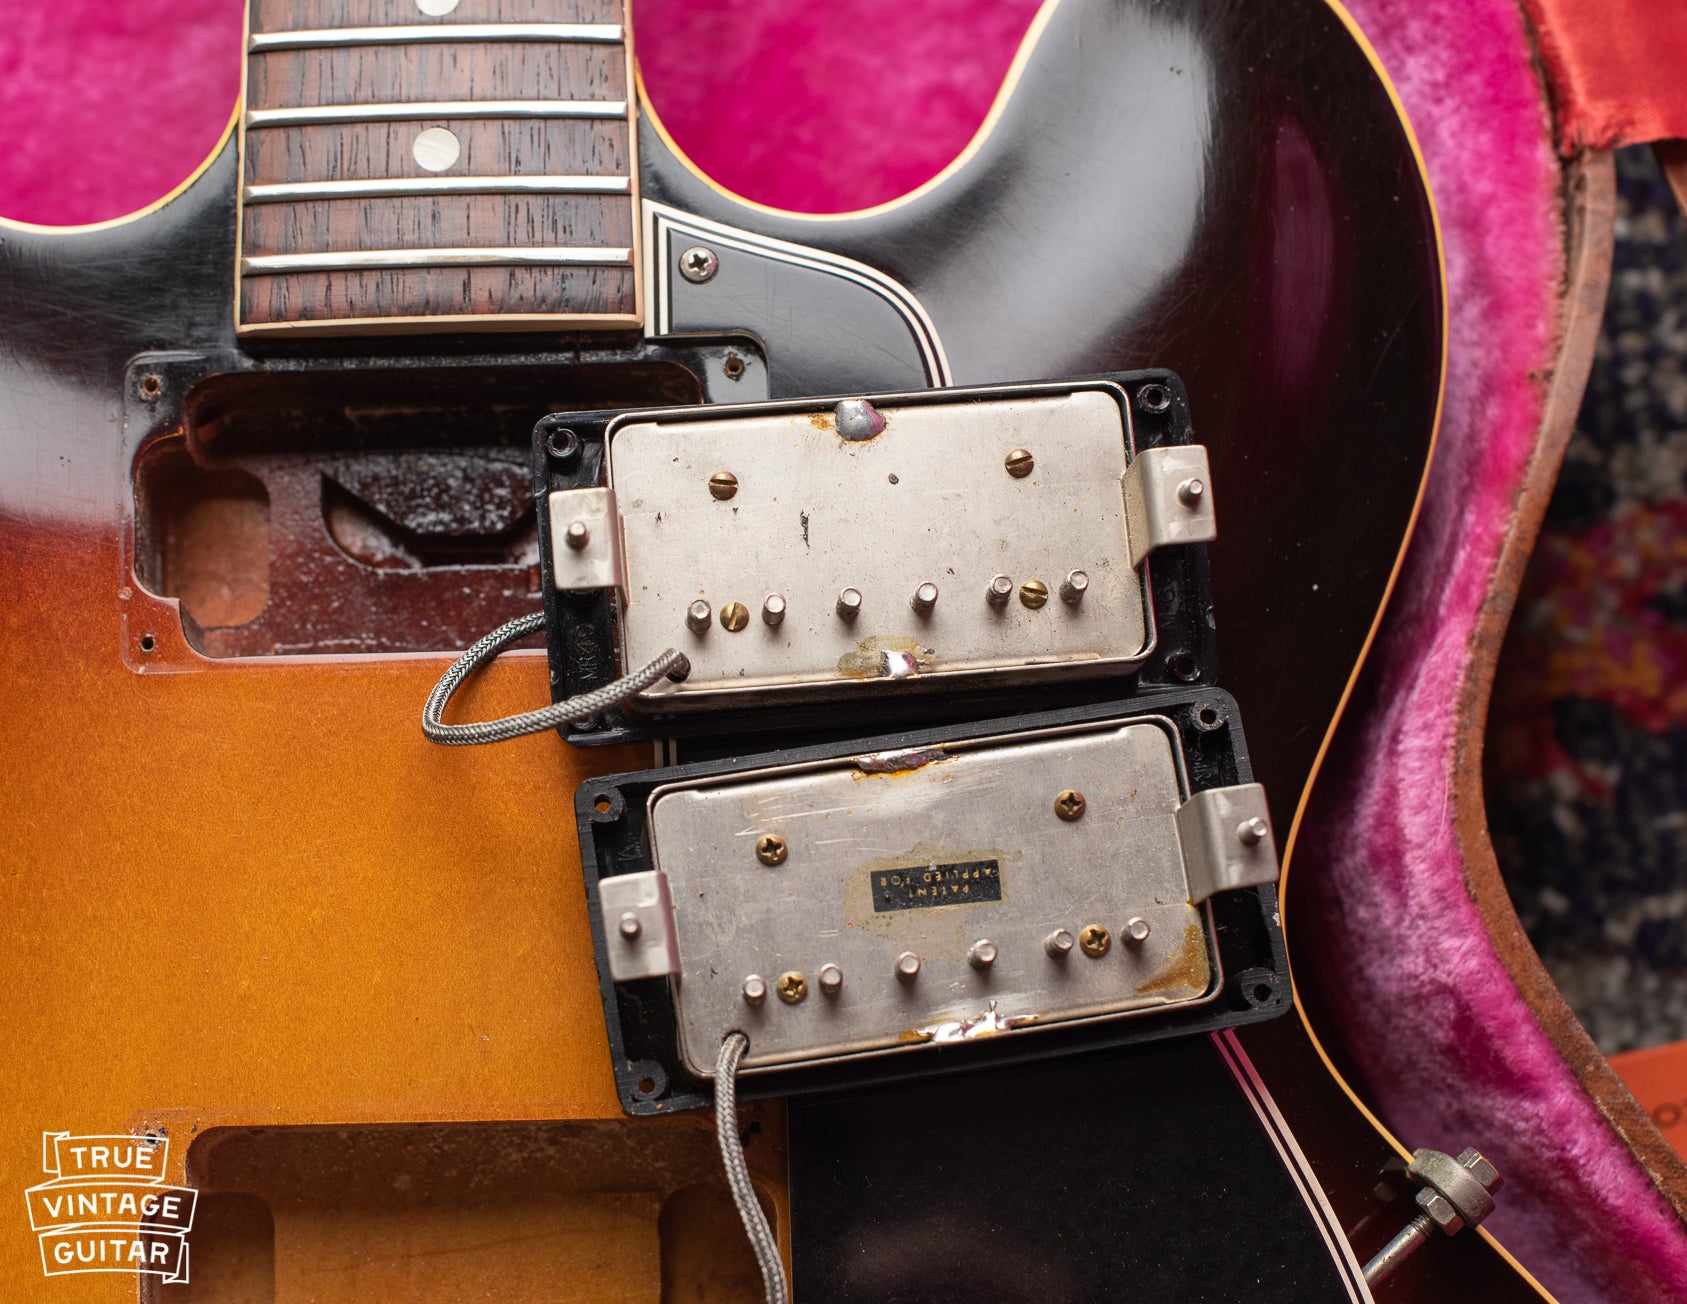 Gibson ES-335 1960 PAF pickups. Neck pickup has no sticker, slot screws, and is out of phase from the bridge pickup.